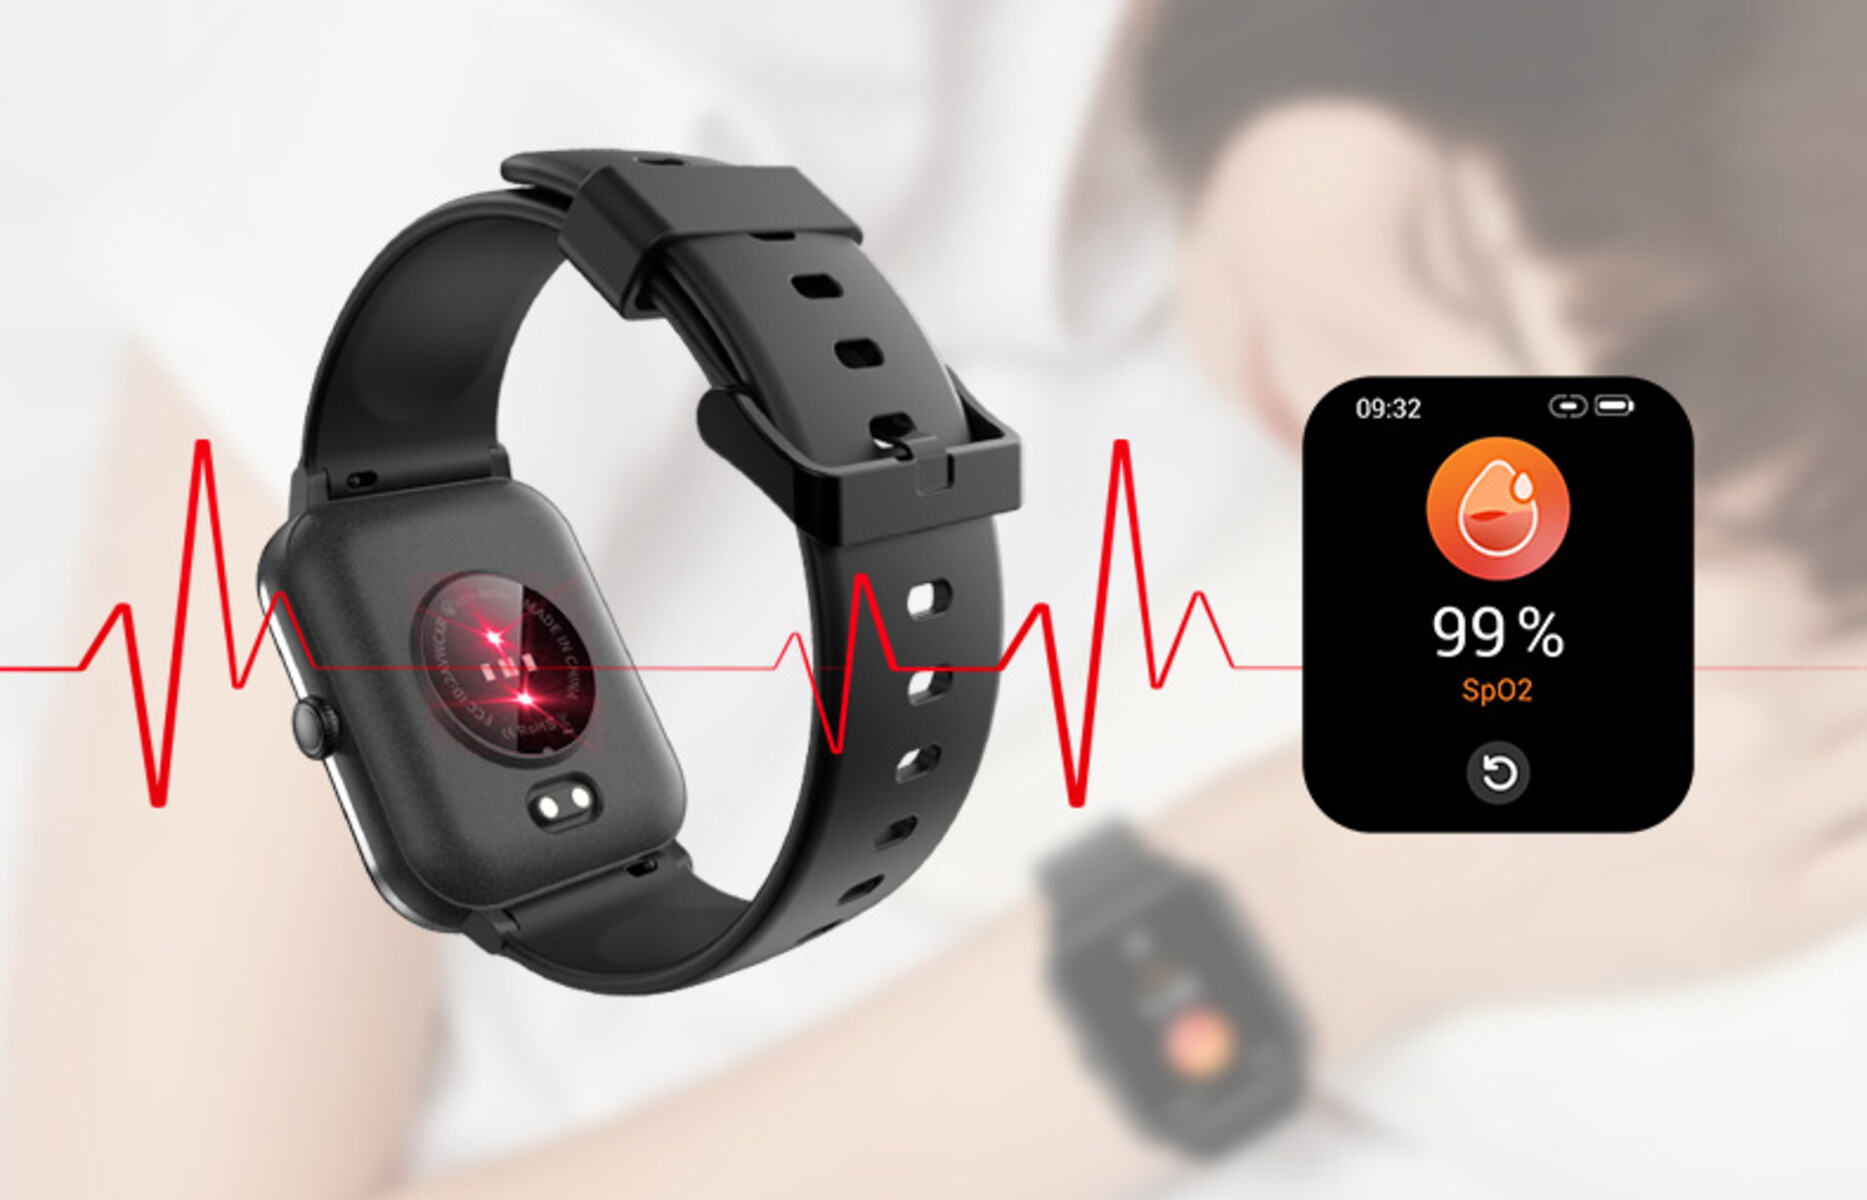 SpO2 On Smartwatches: Oxygen Saturation Monitoring